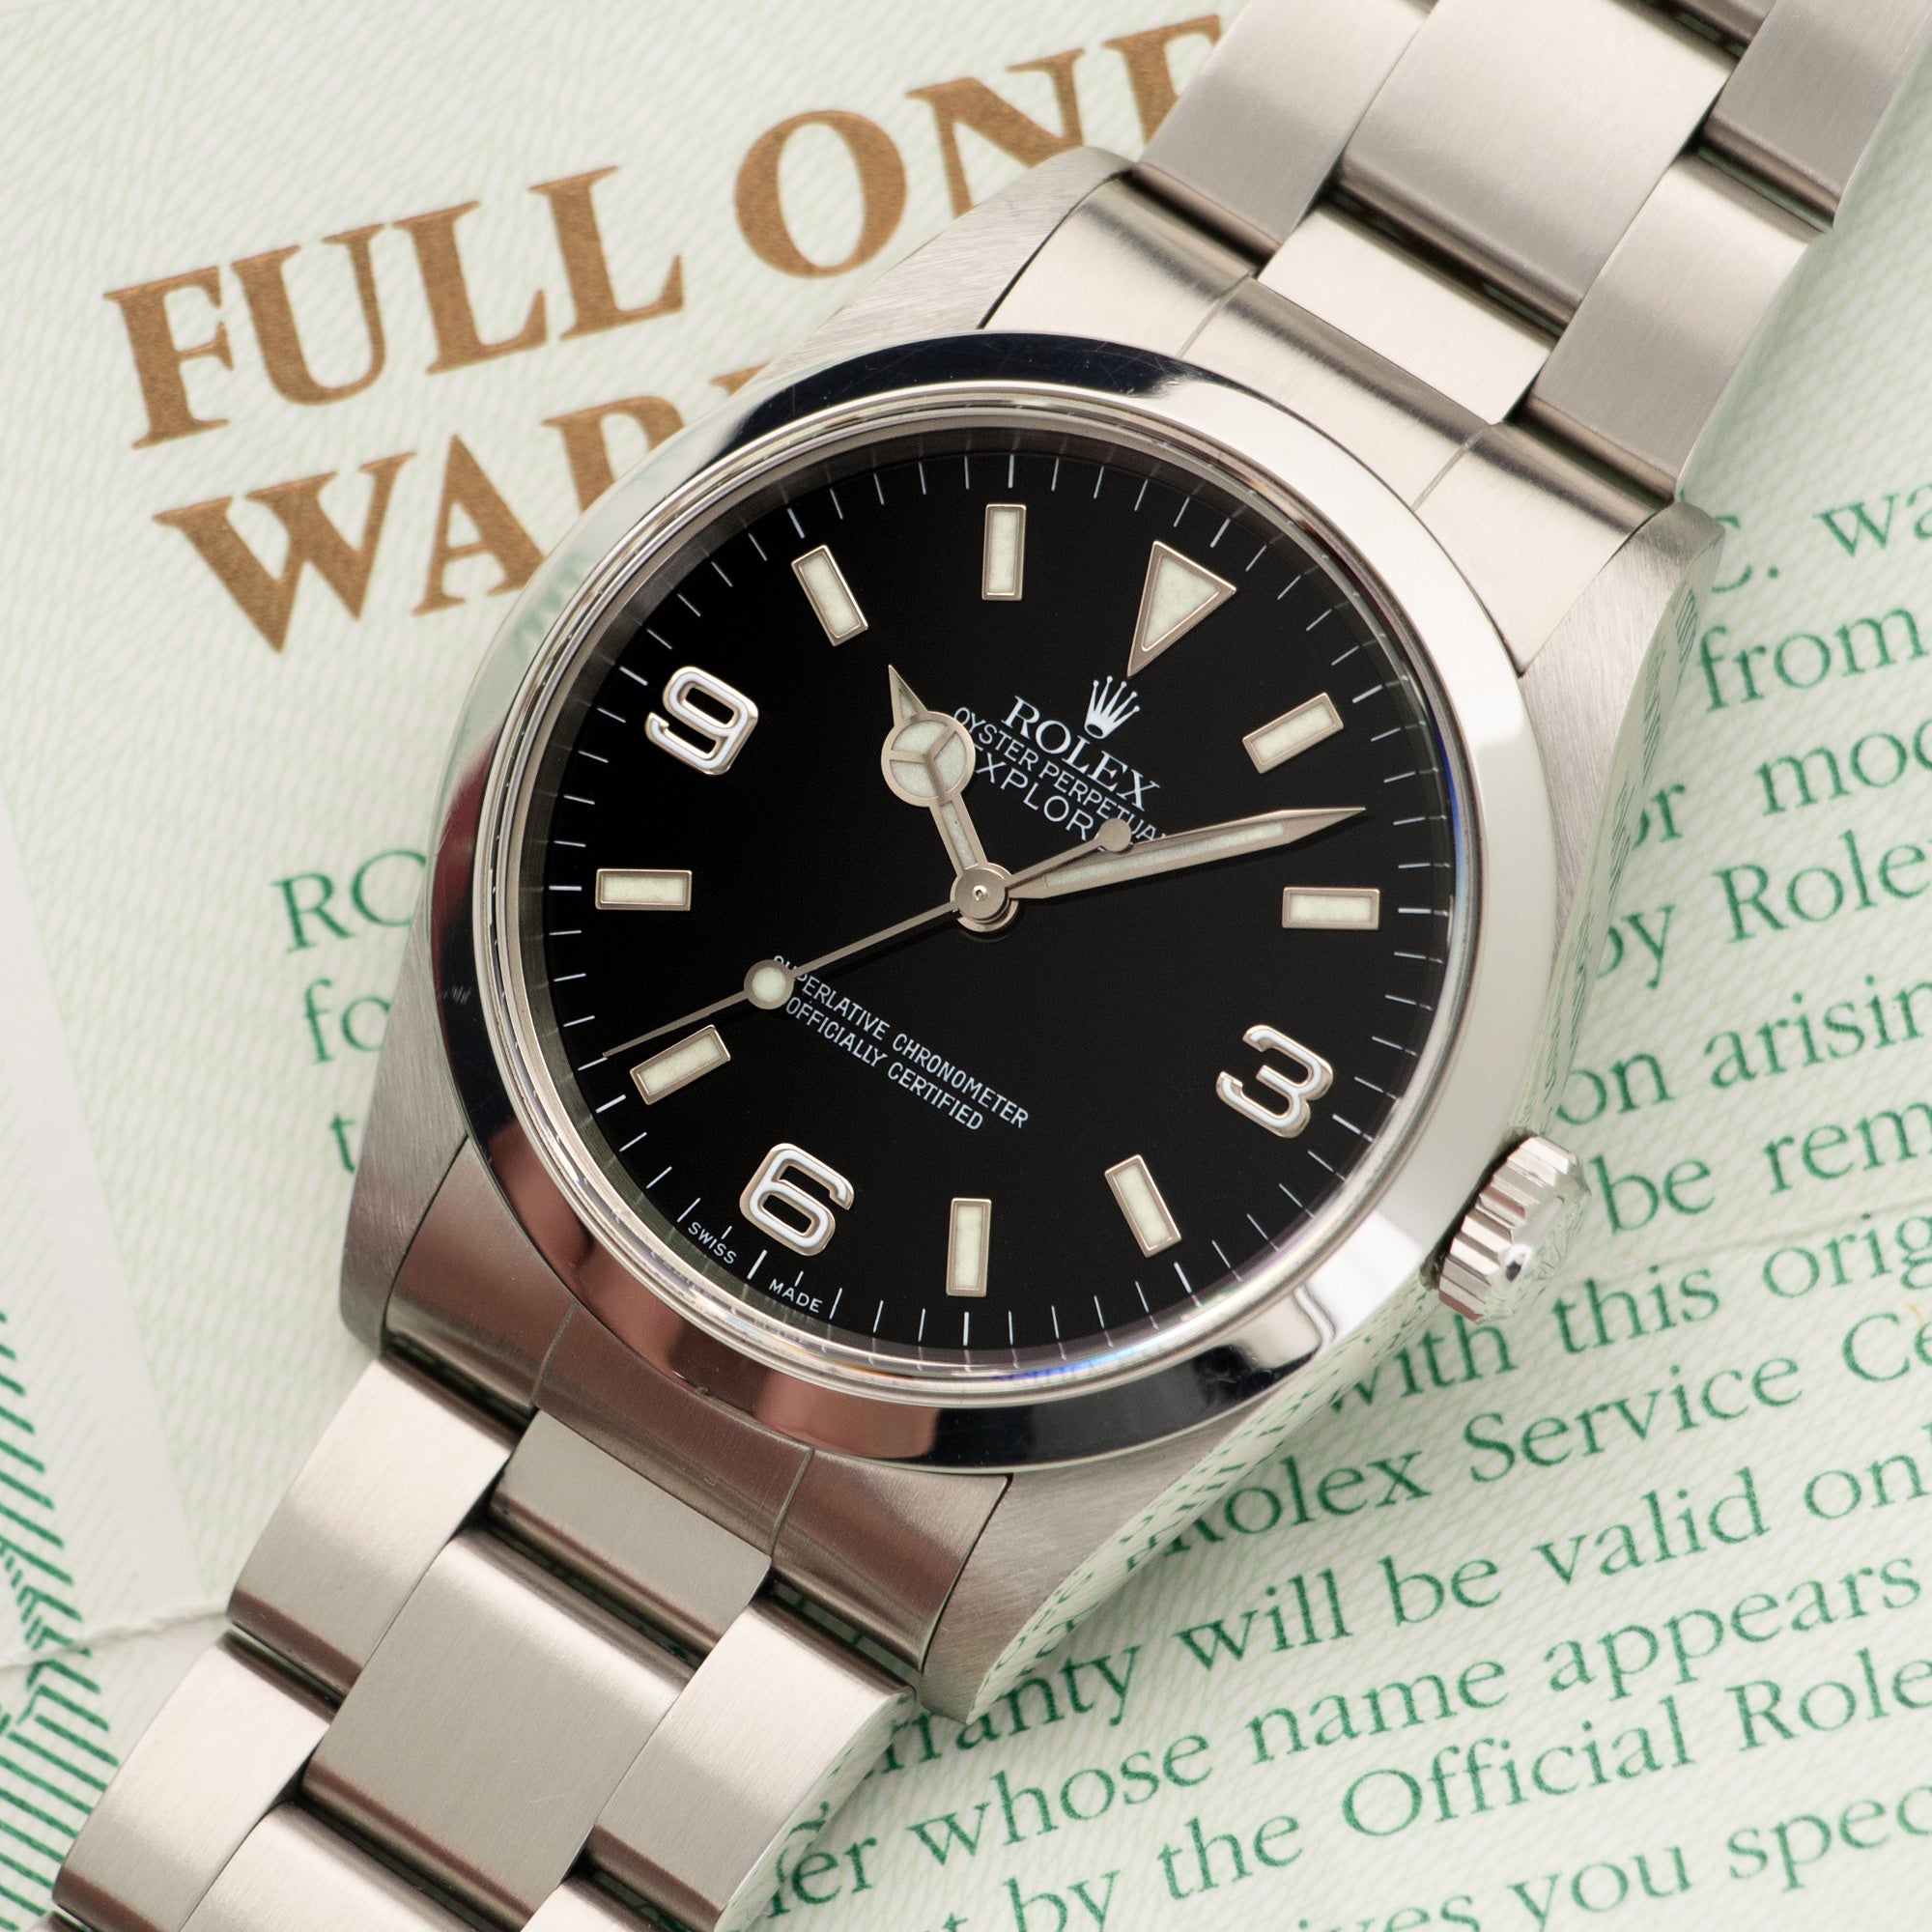 Rolex - Rolex Explorer I Watch Ref. 14270 with Original Papers - The Keystone Watches